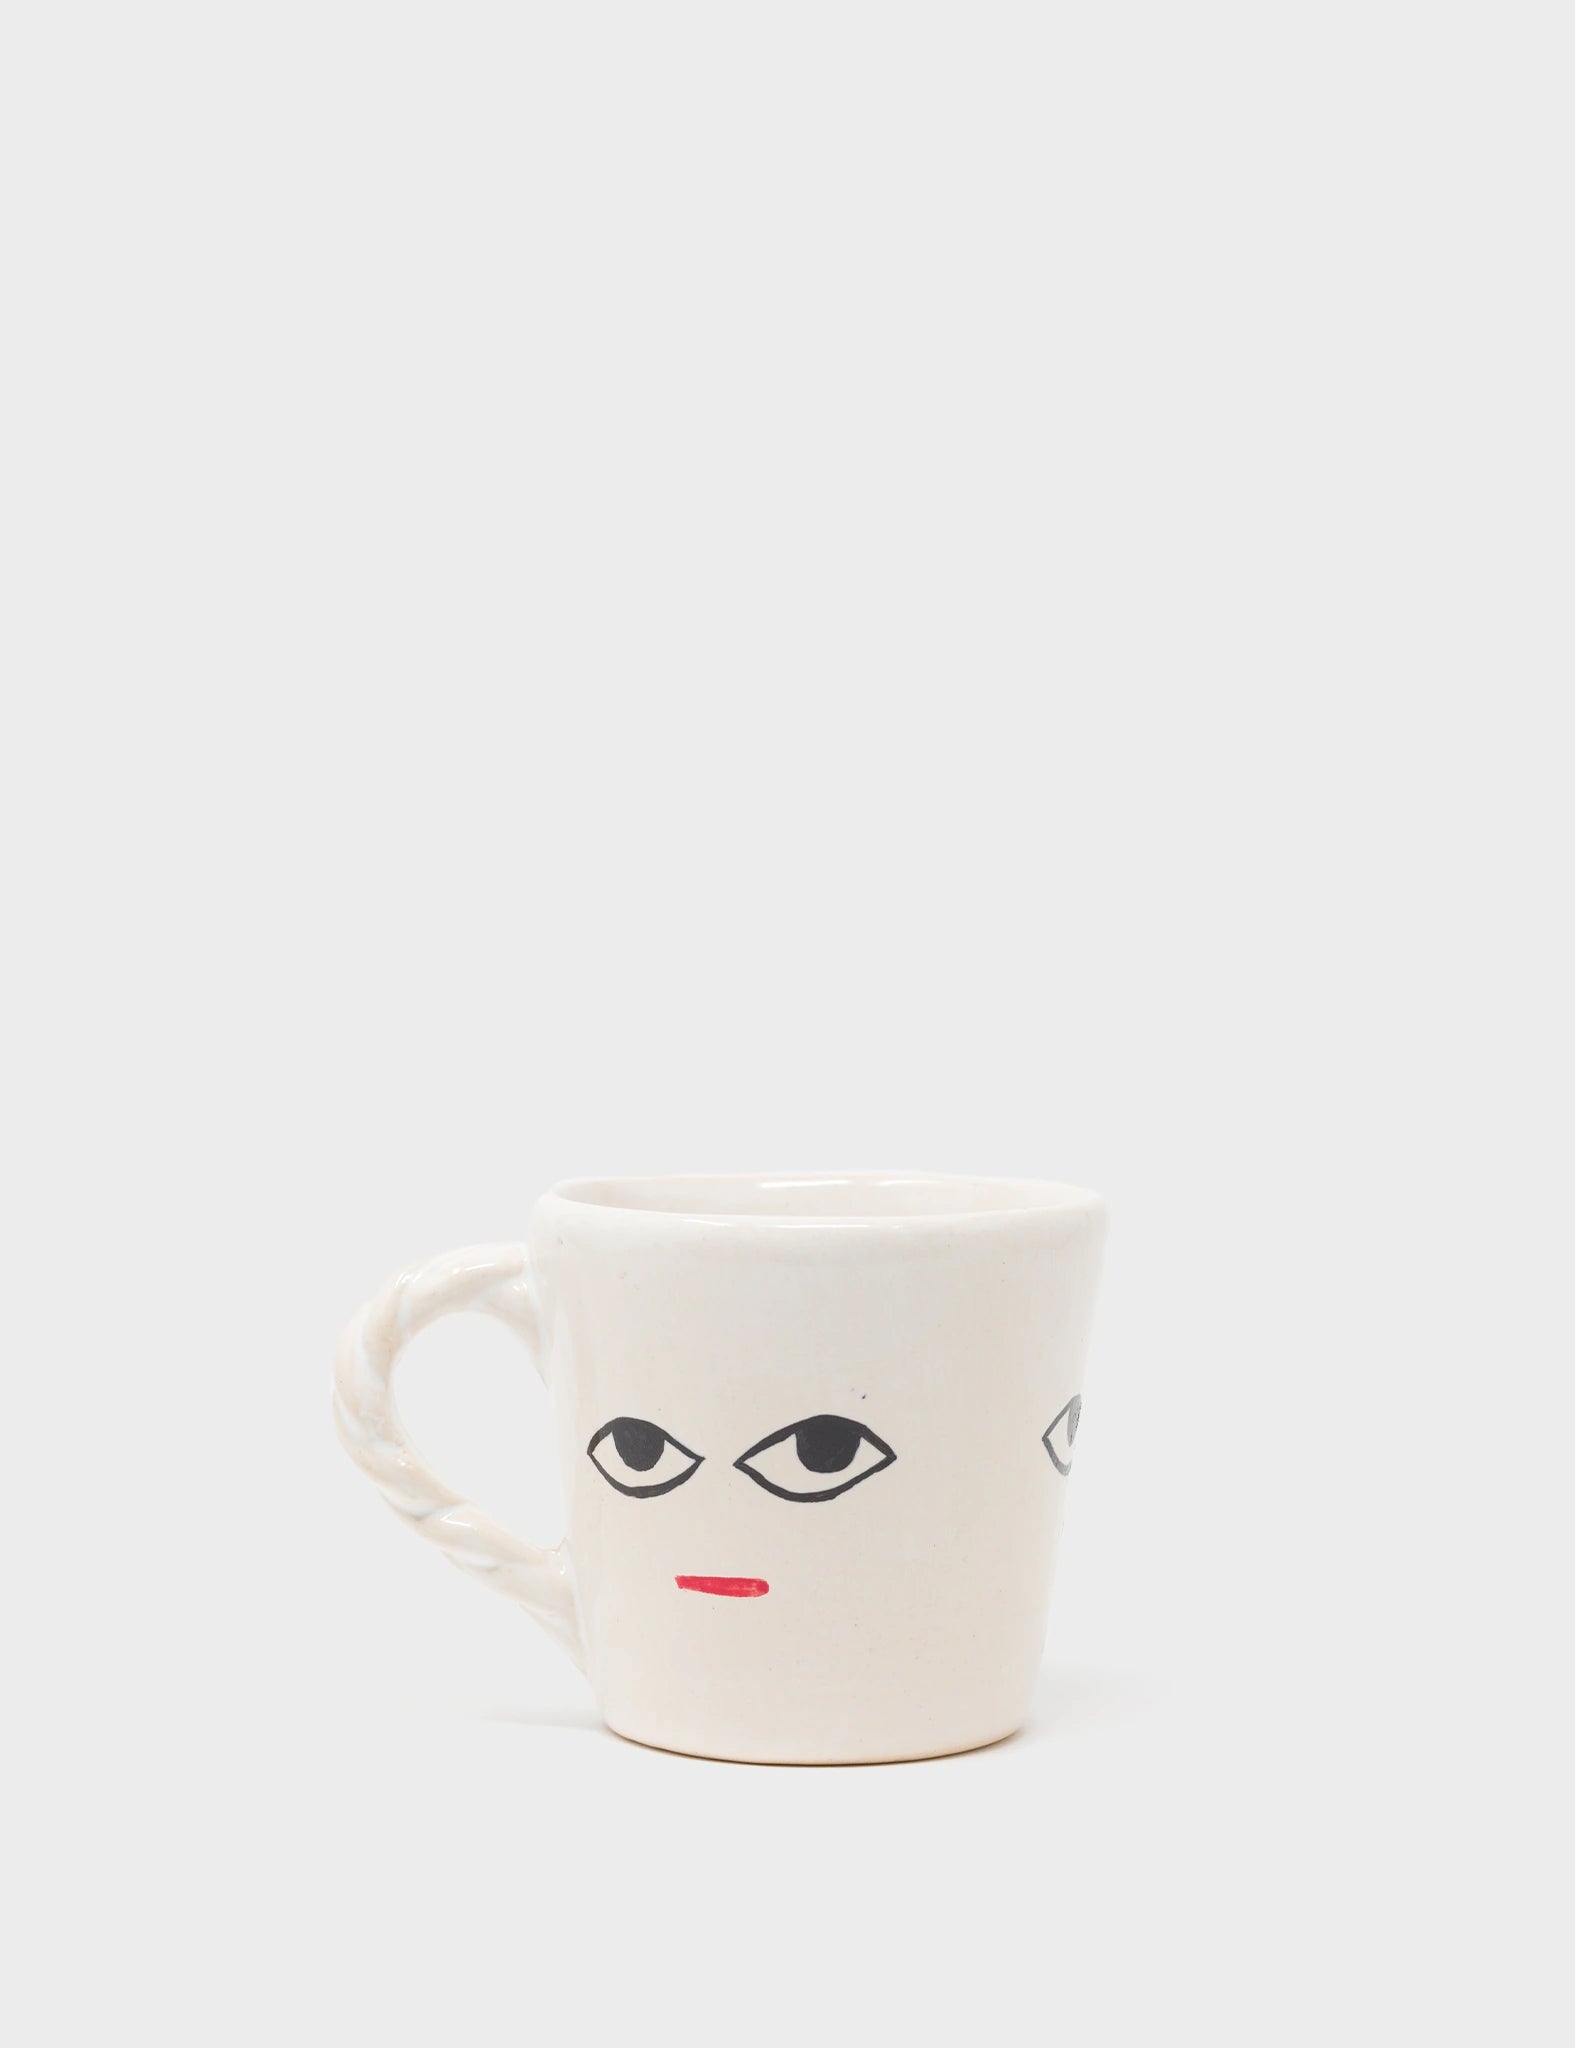 Daily Delights - Cuttle Up Ceramic Mug -Front